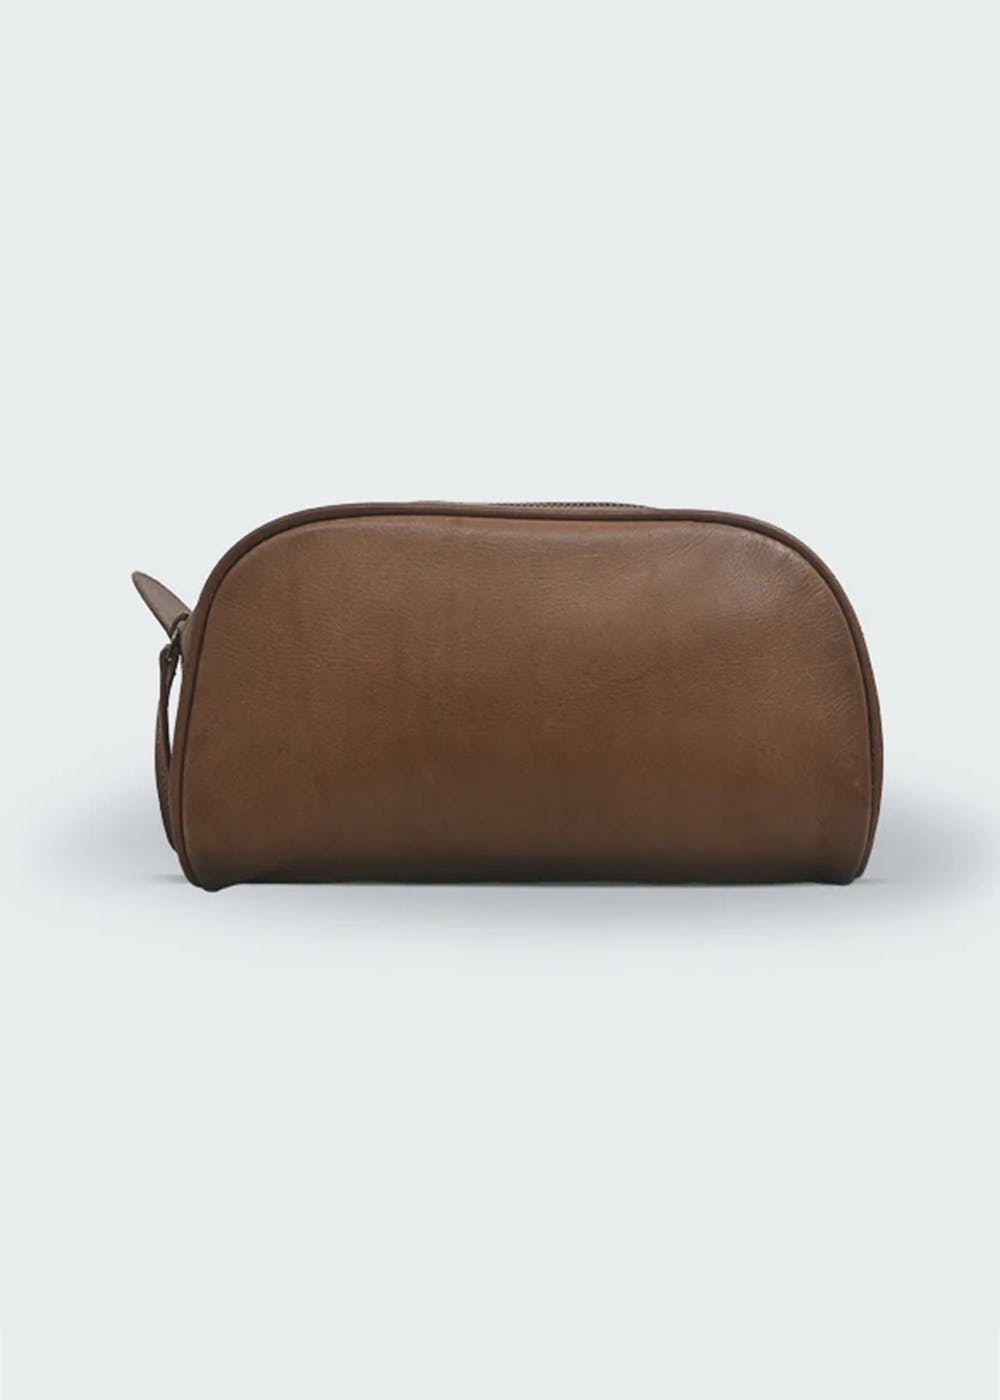 Tan Brown Pure Leather Toiletry Bag